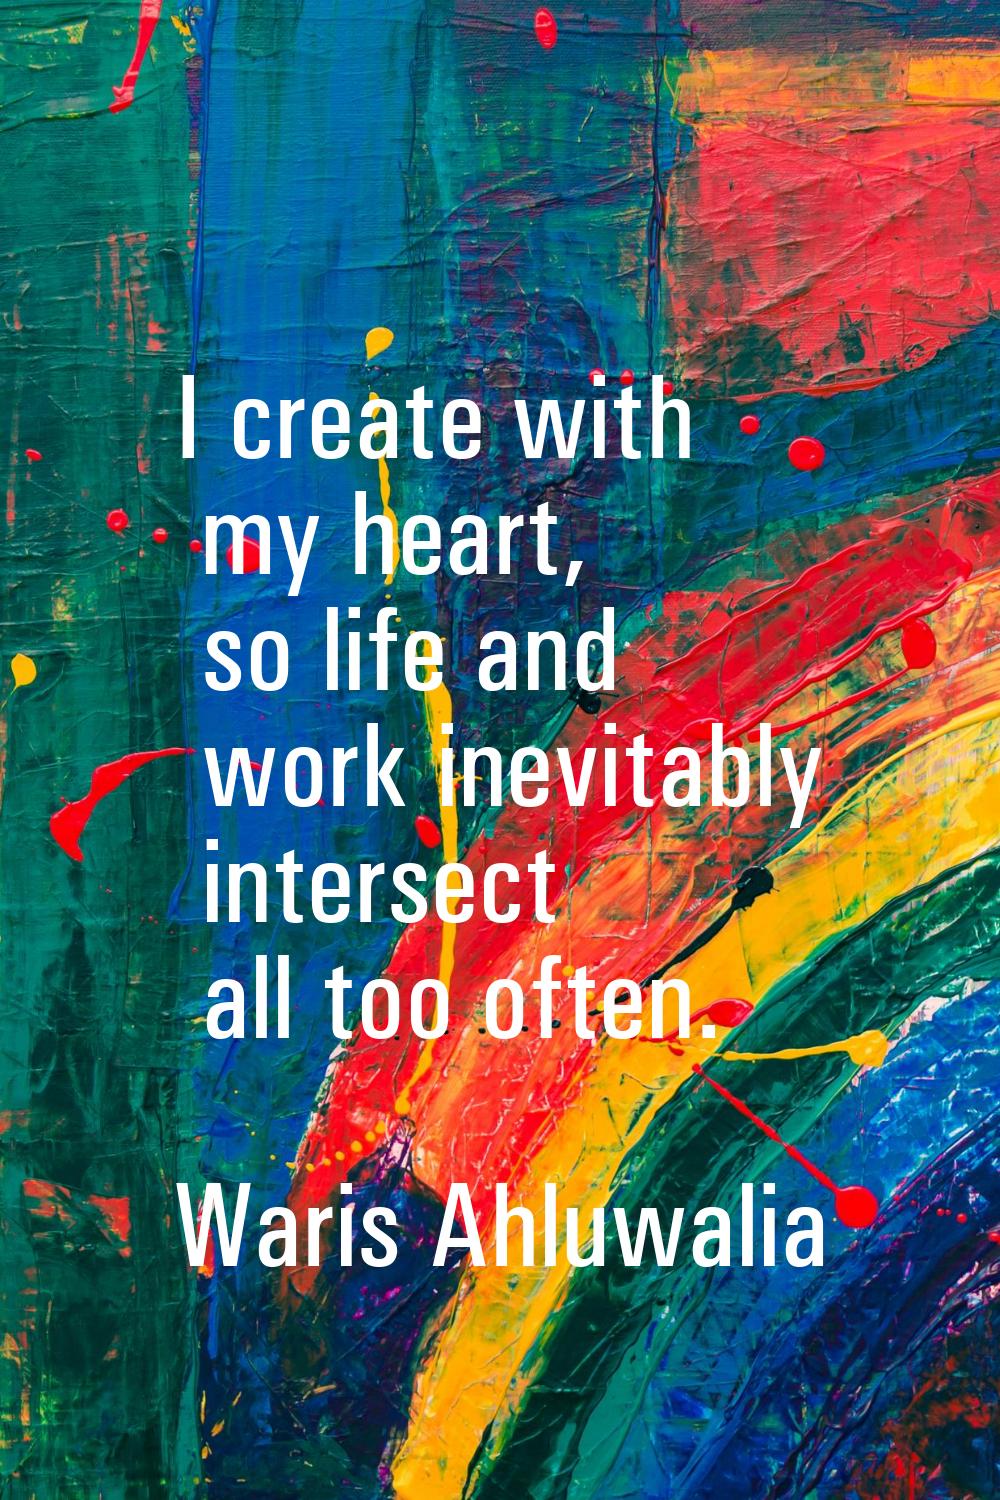 I create with my heart, so life and work inevitably intersect all too often.